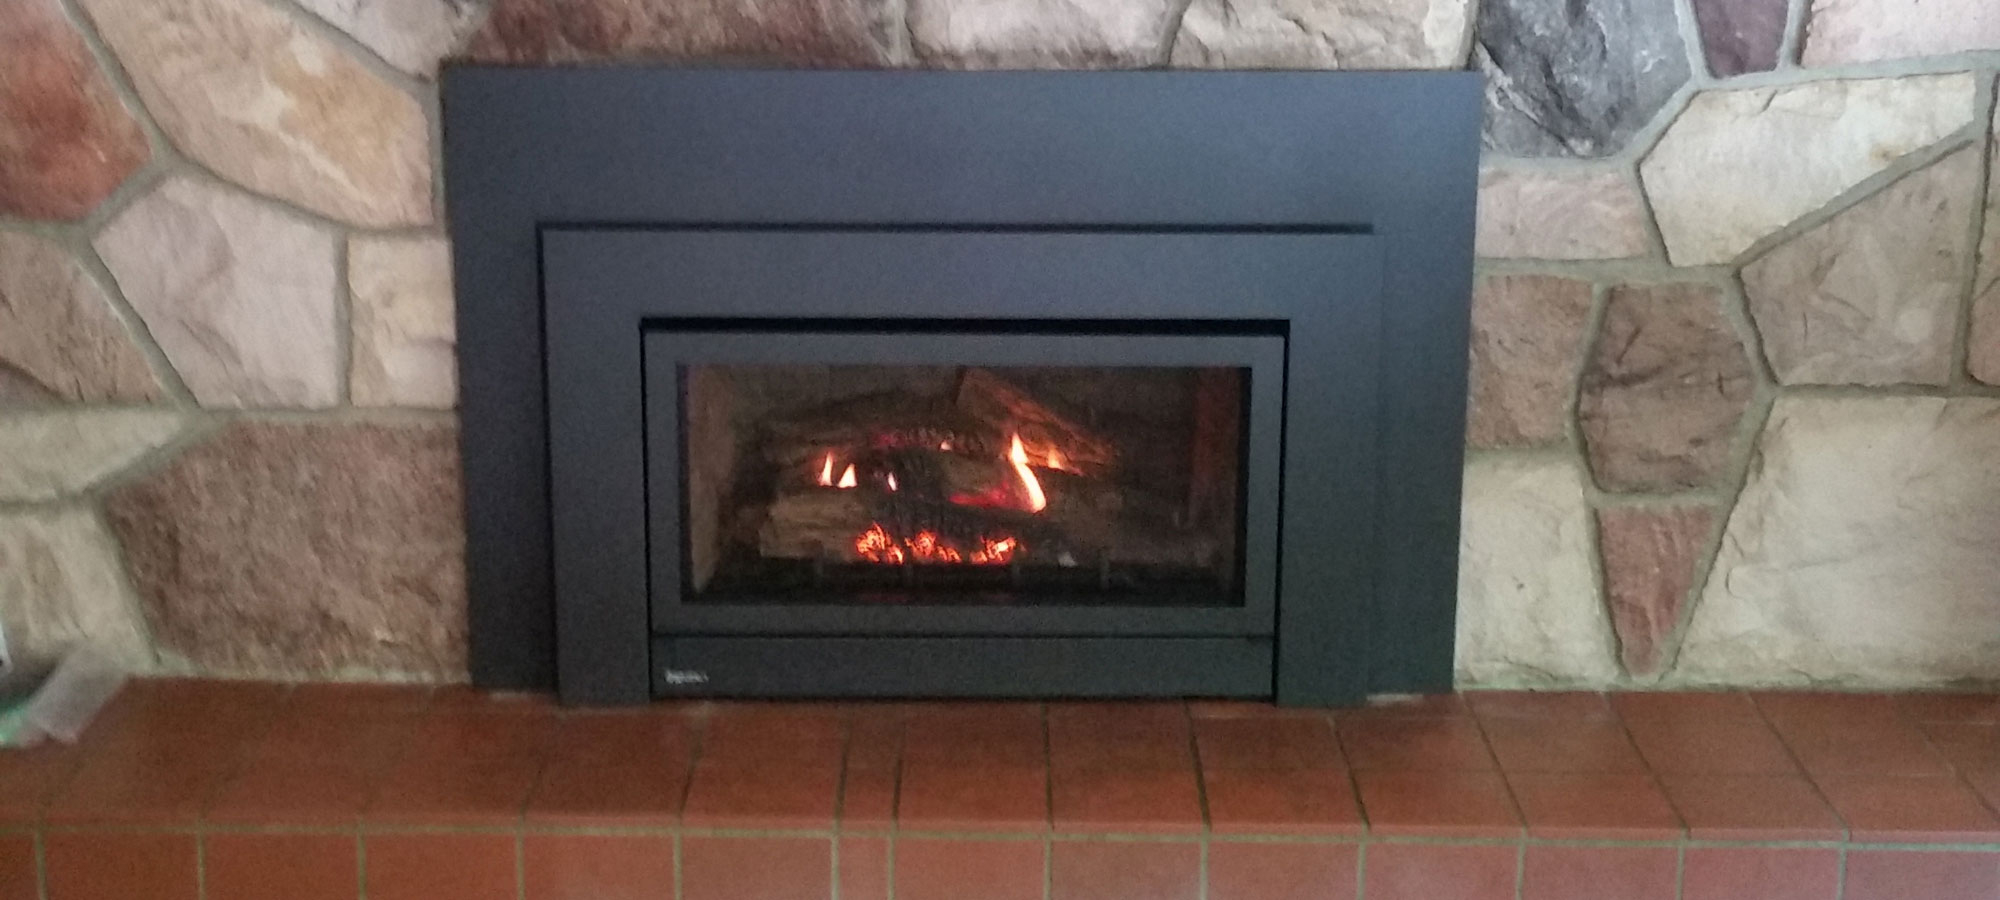 Gas Fireplace Repair Cleaning Replacement Edmonton Area with size 2000 X 900